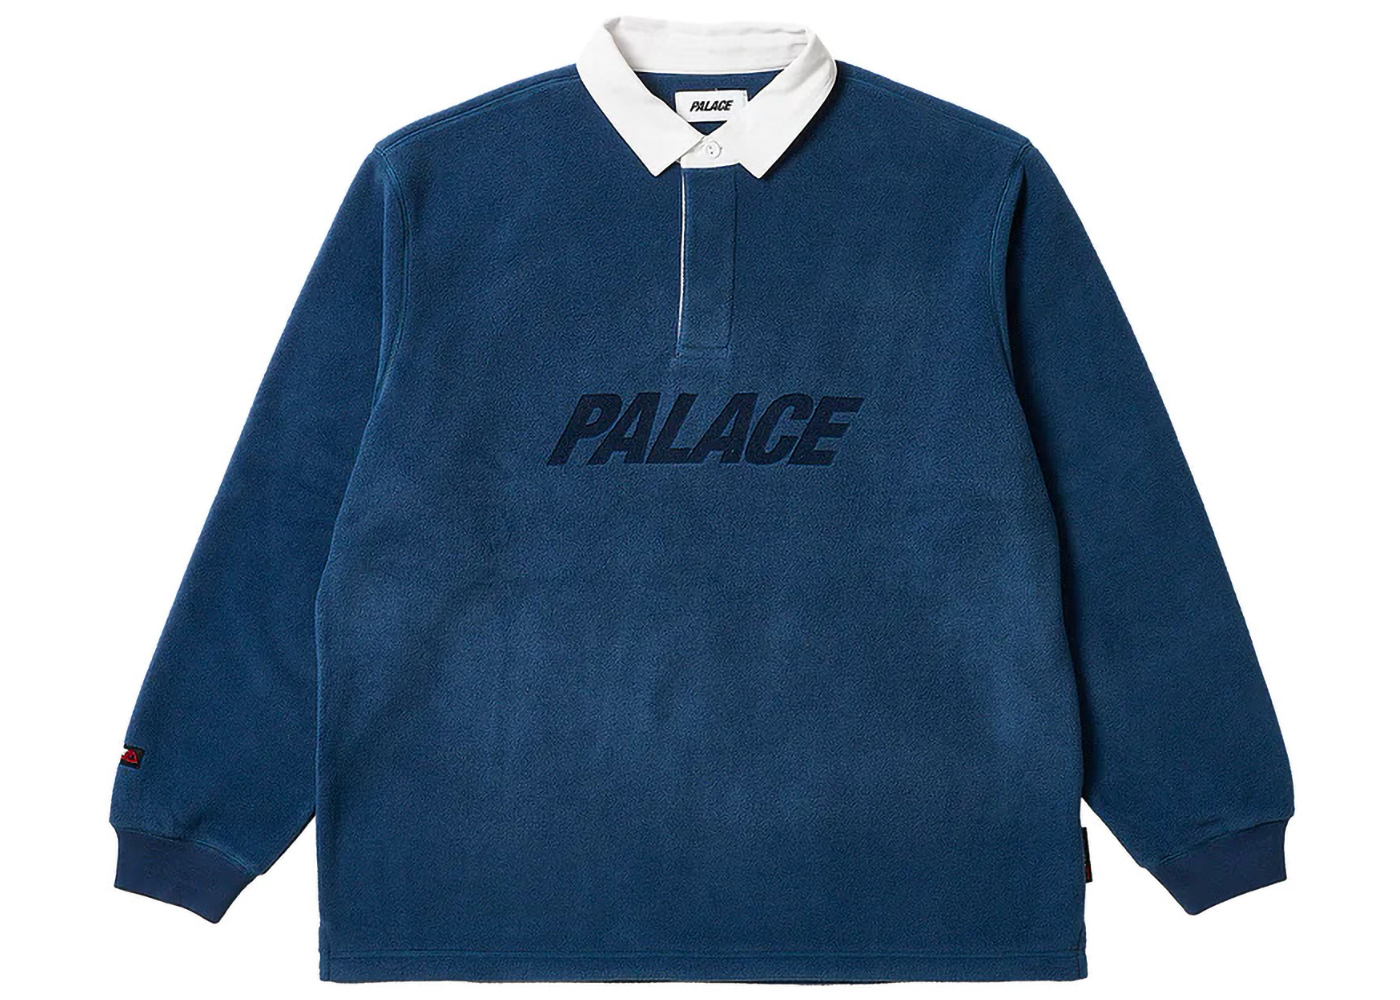 Palace Polartec Rugby Navy